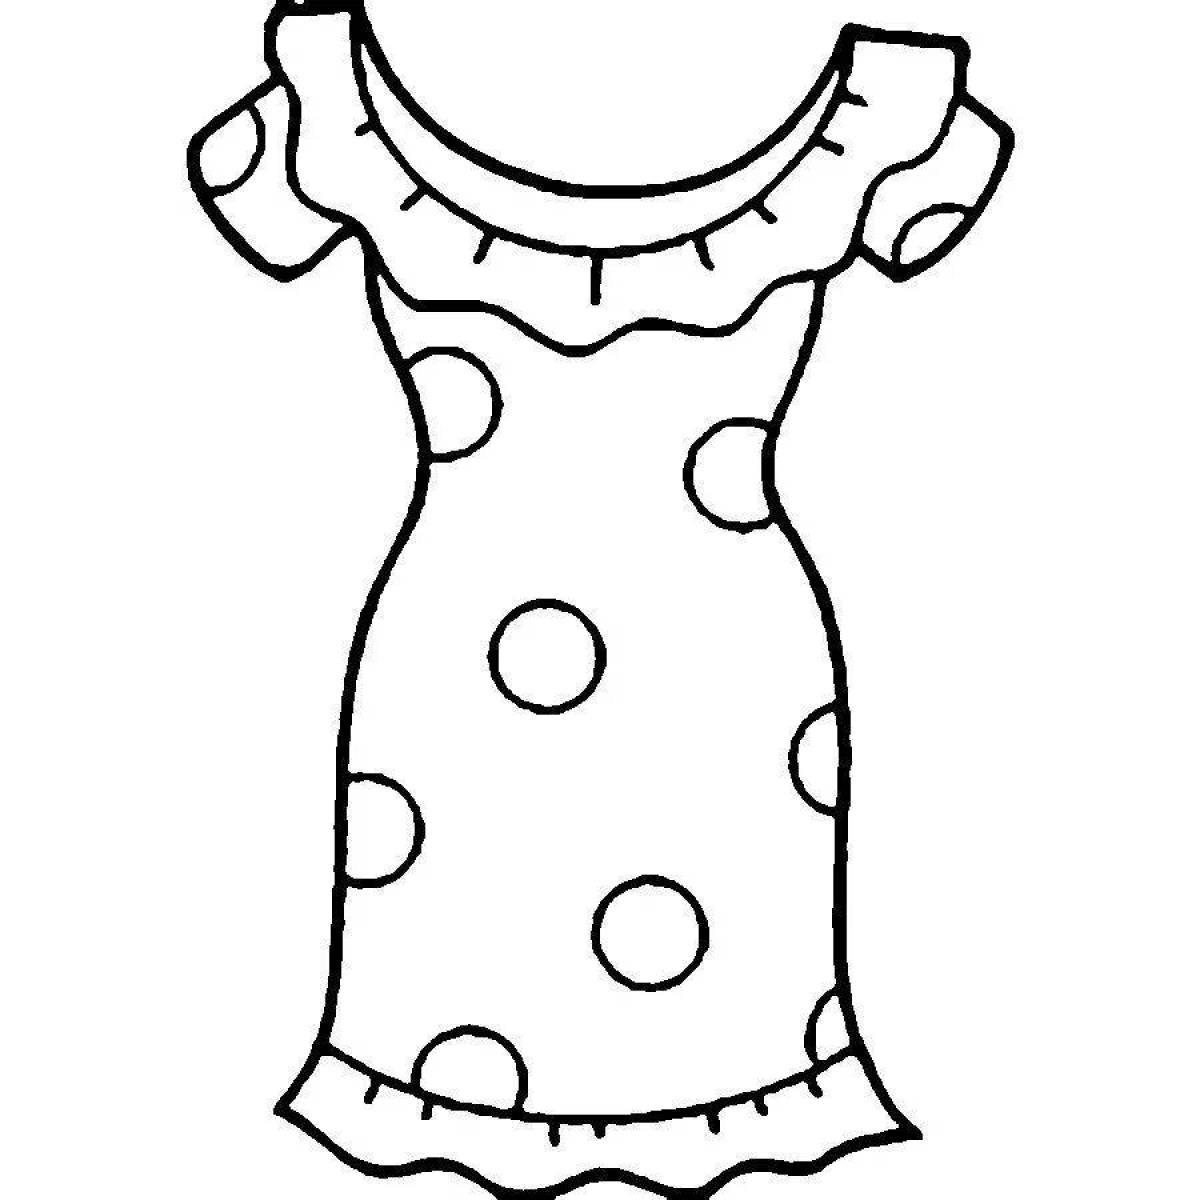 Coloring page joyful doll dress for children 4-5 years old